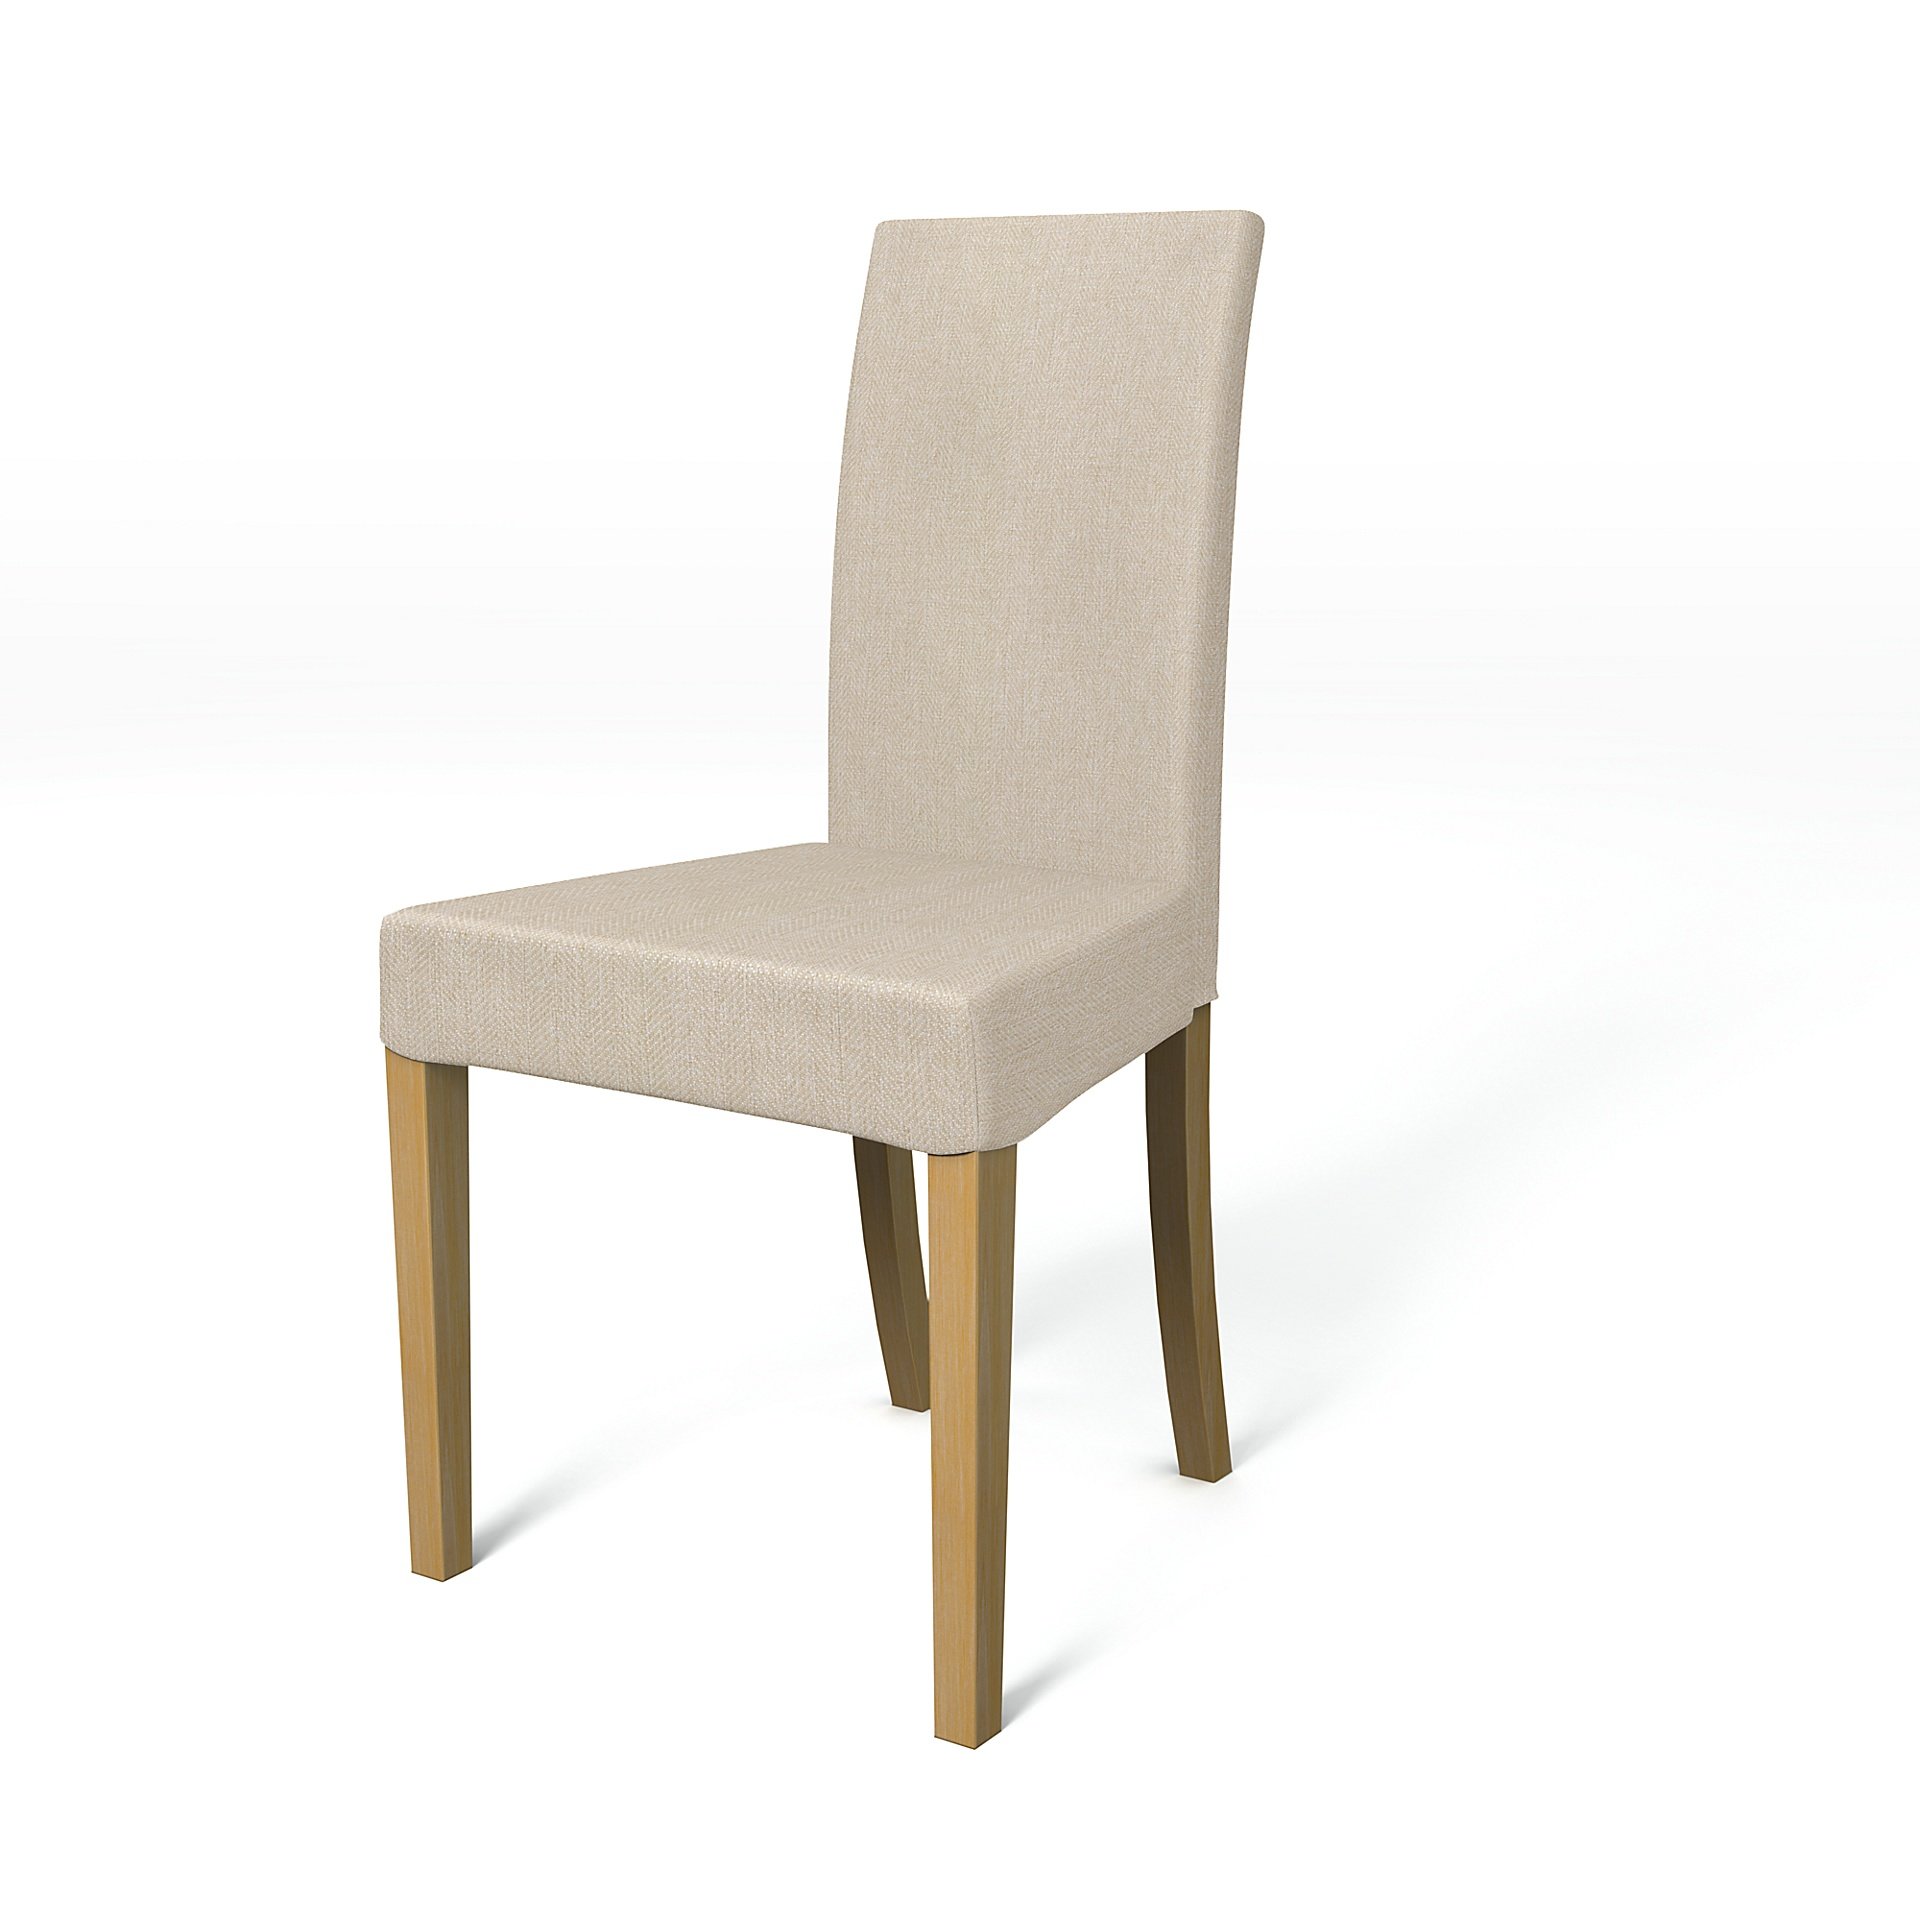 IKEA - Harry Dining Chair Cover, Natural, Boucle & Texture - Bemz